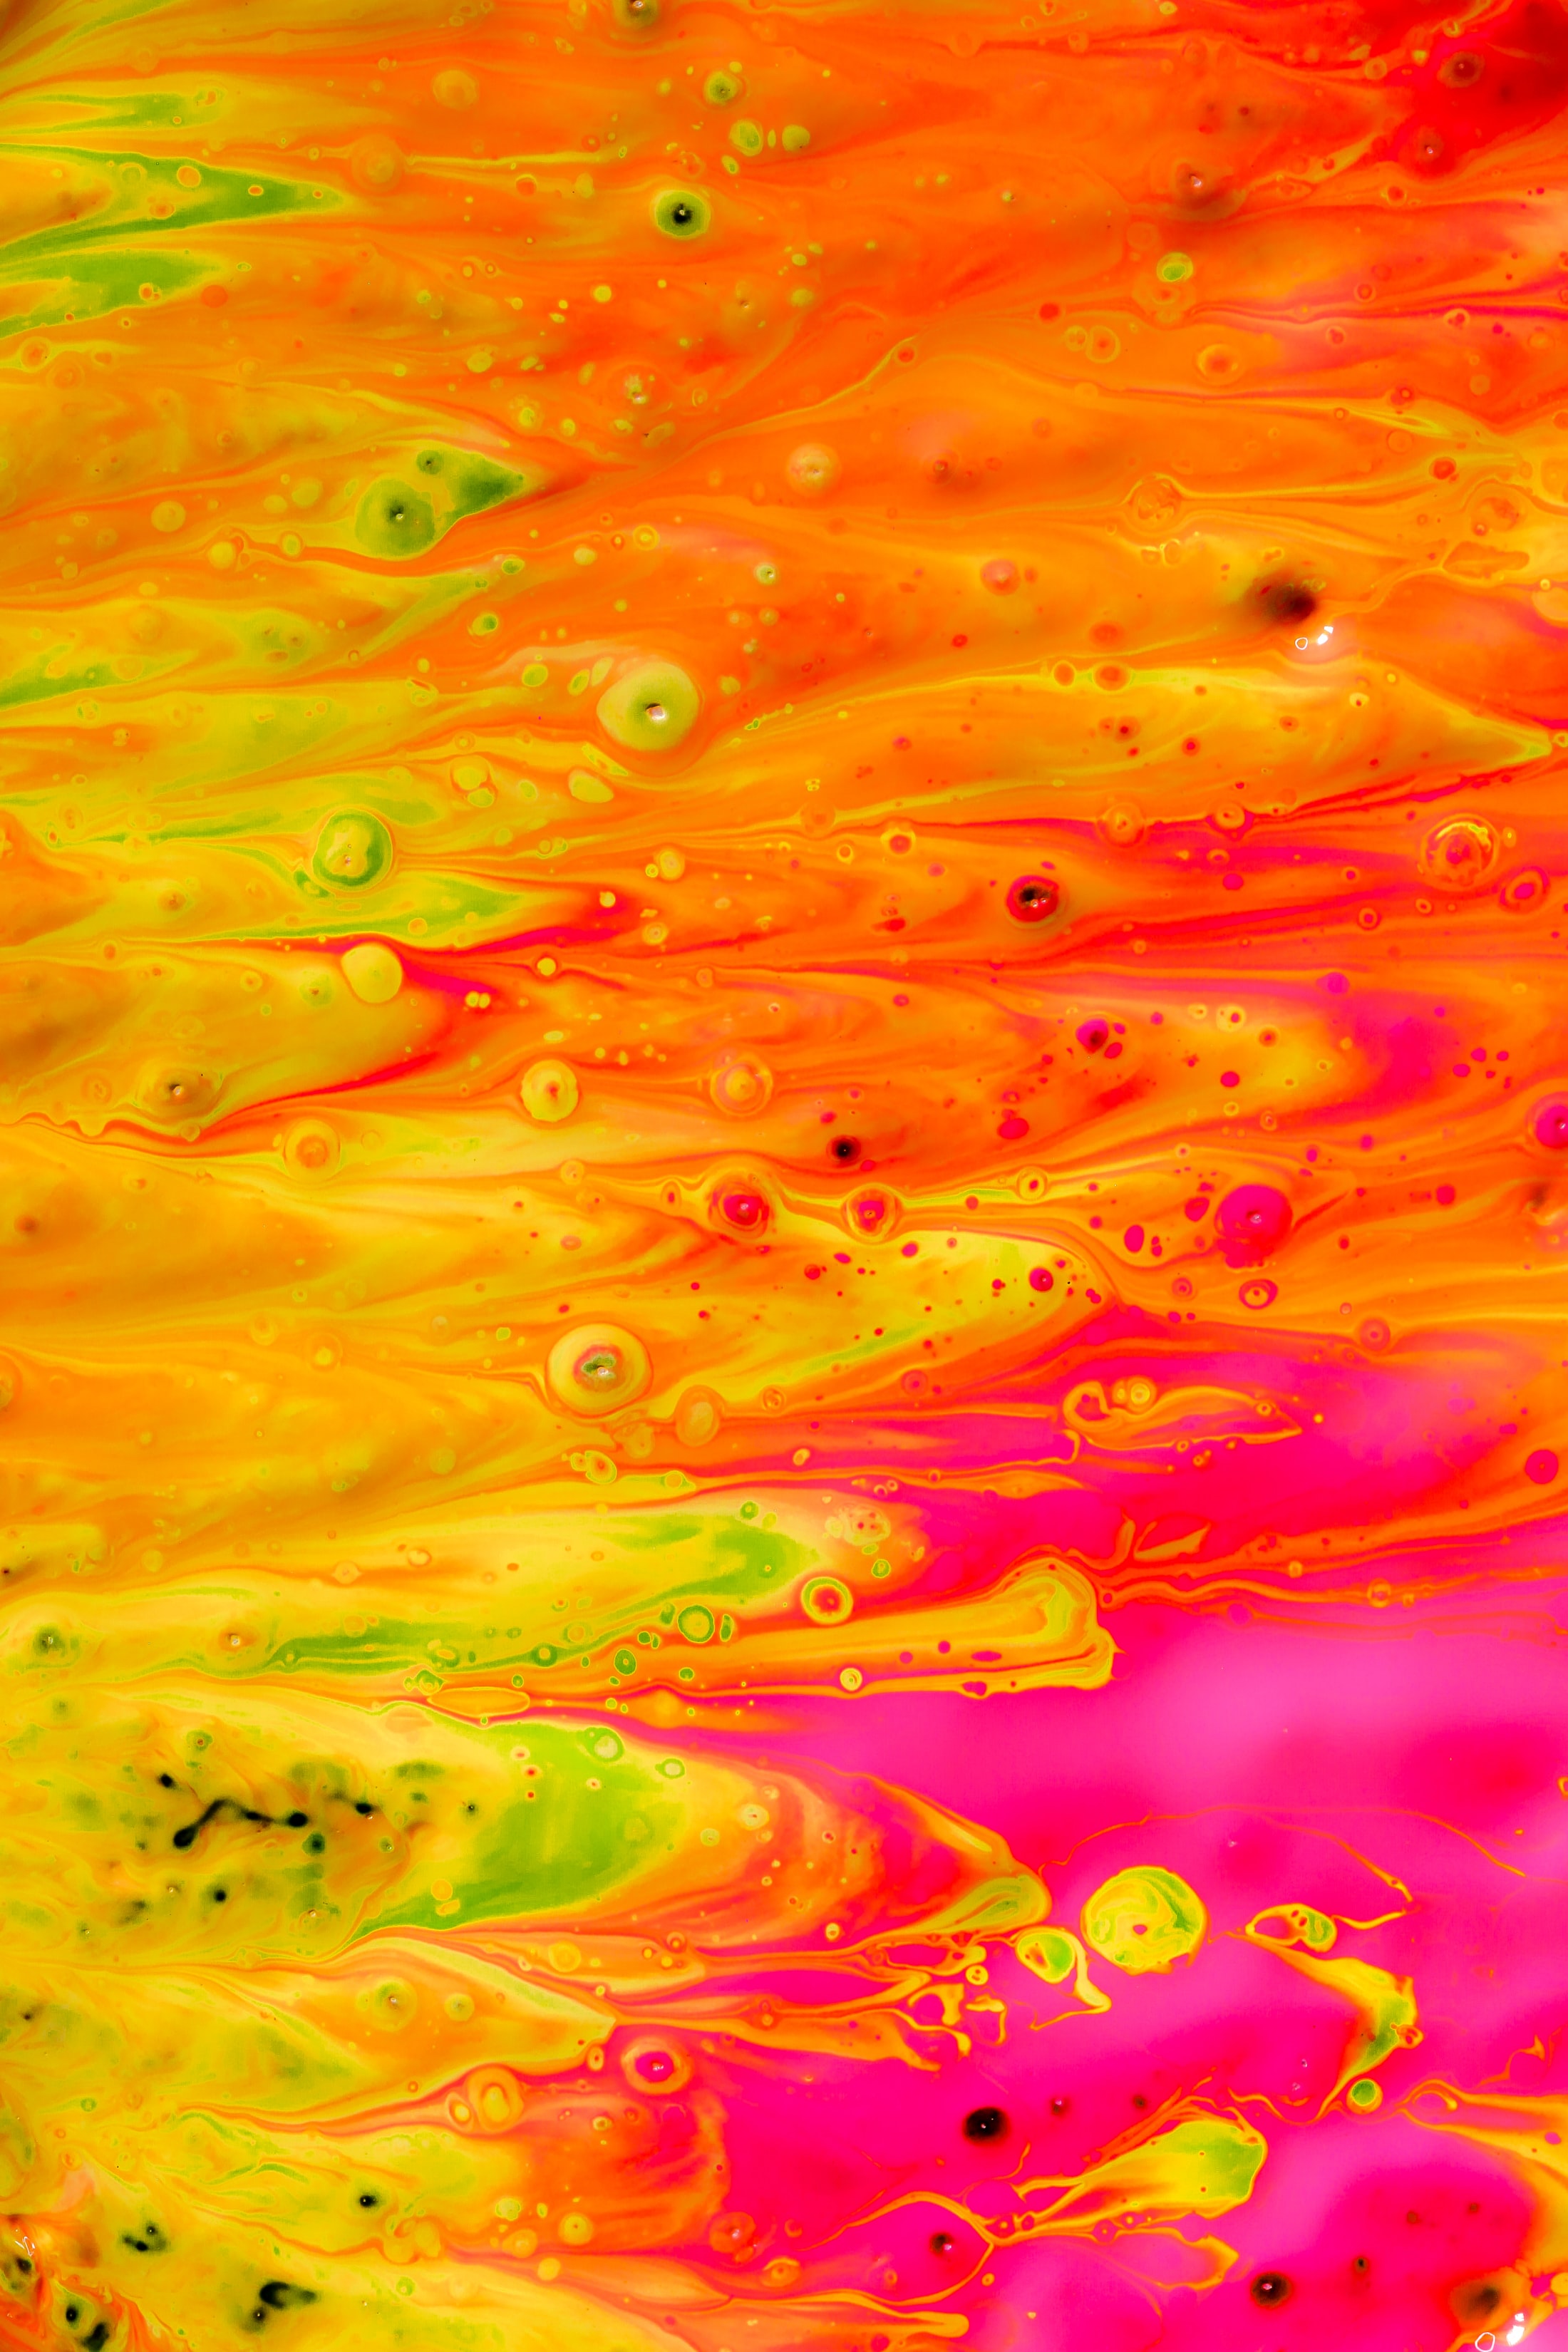 divorces, multicolored, abstract, motley, paint, liquid, distortion